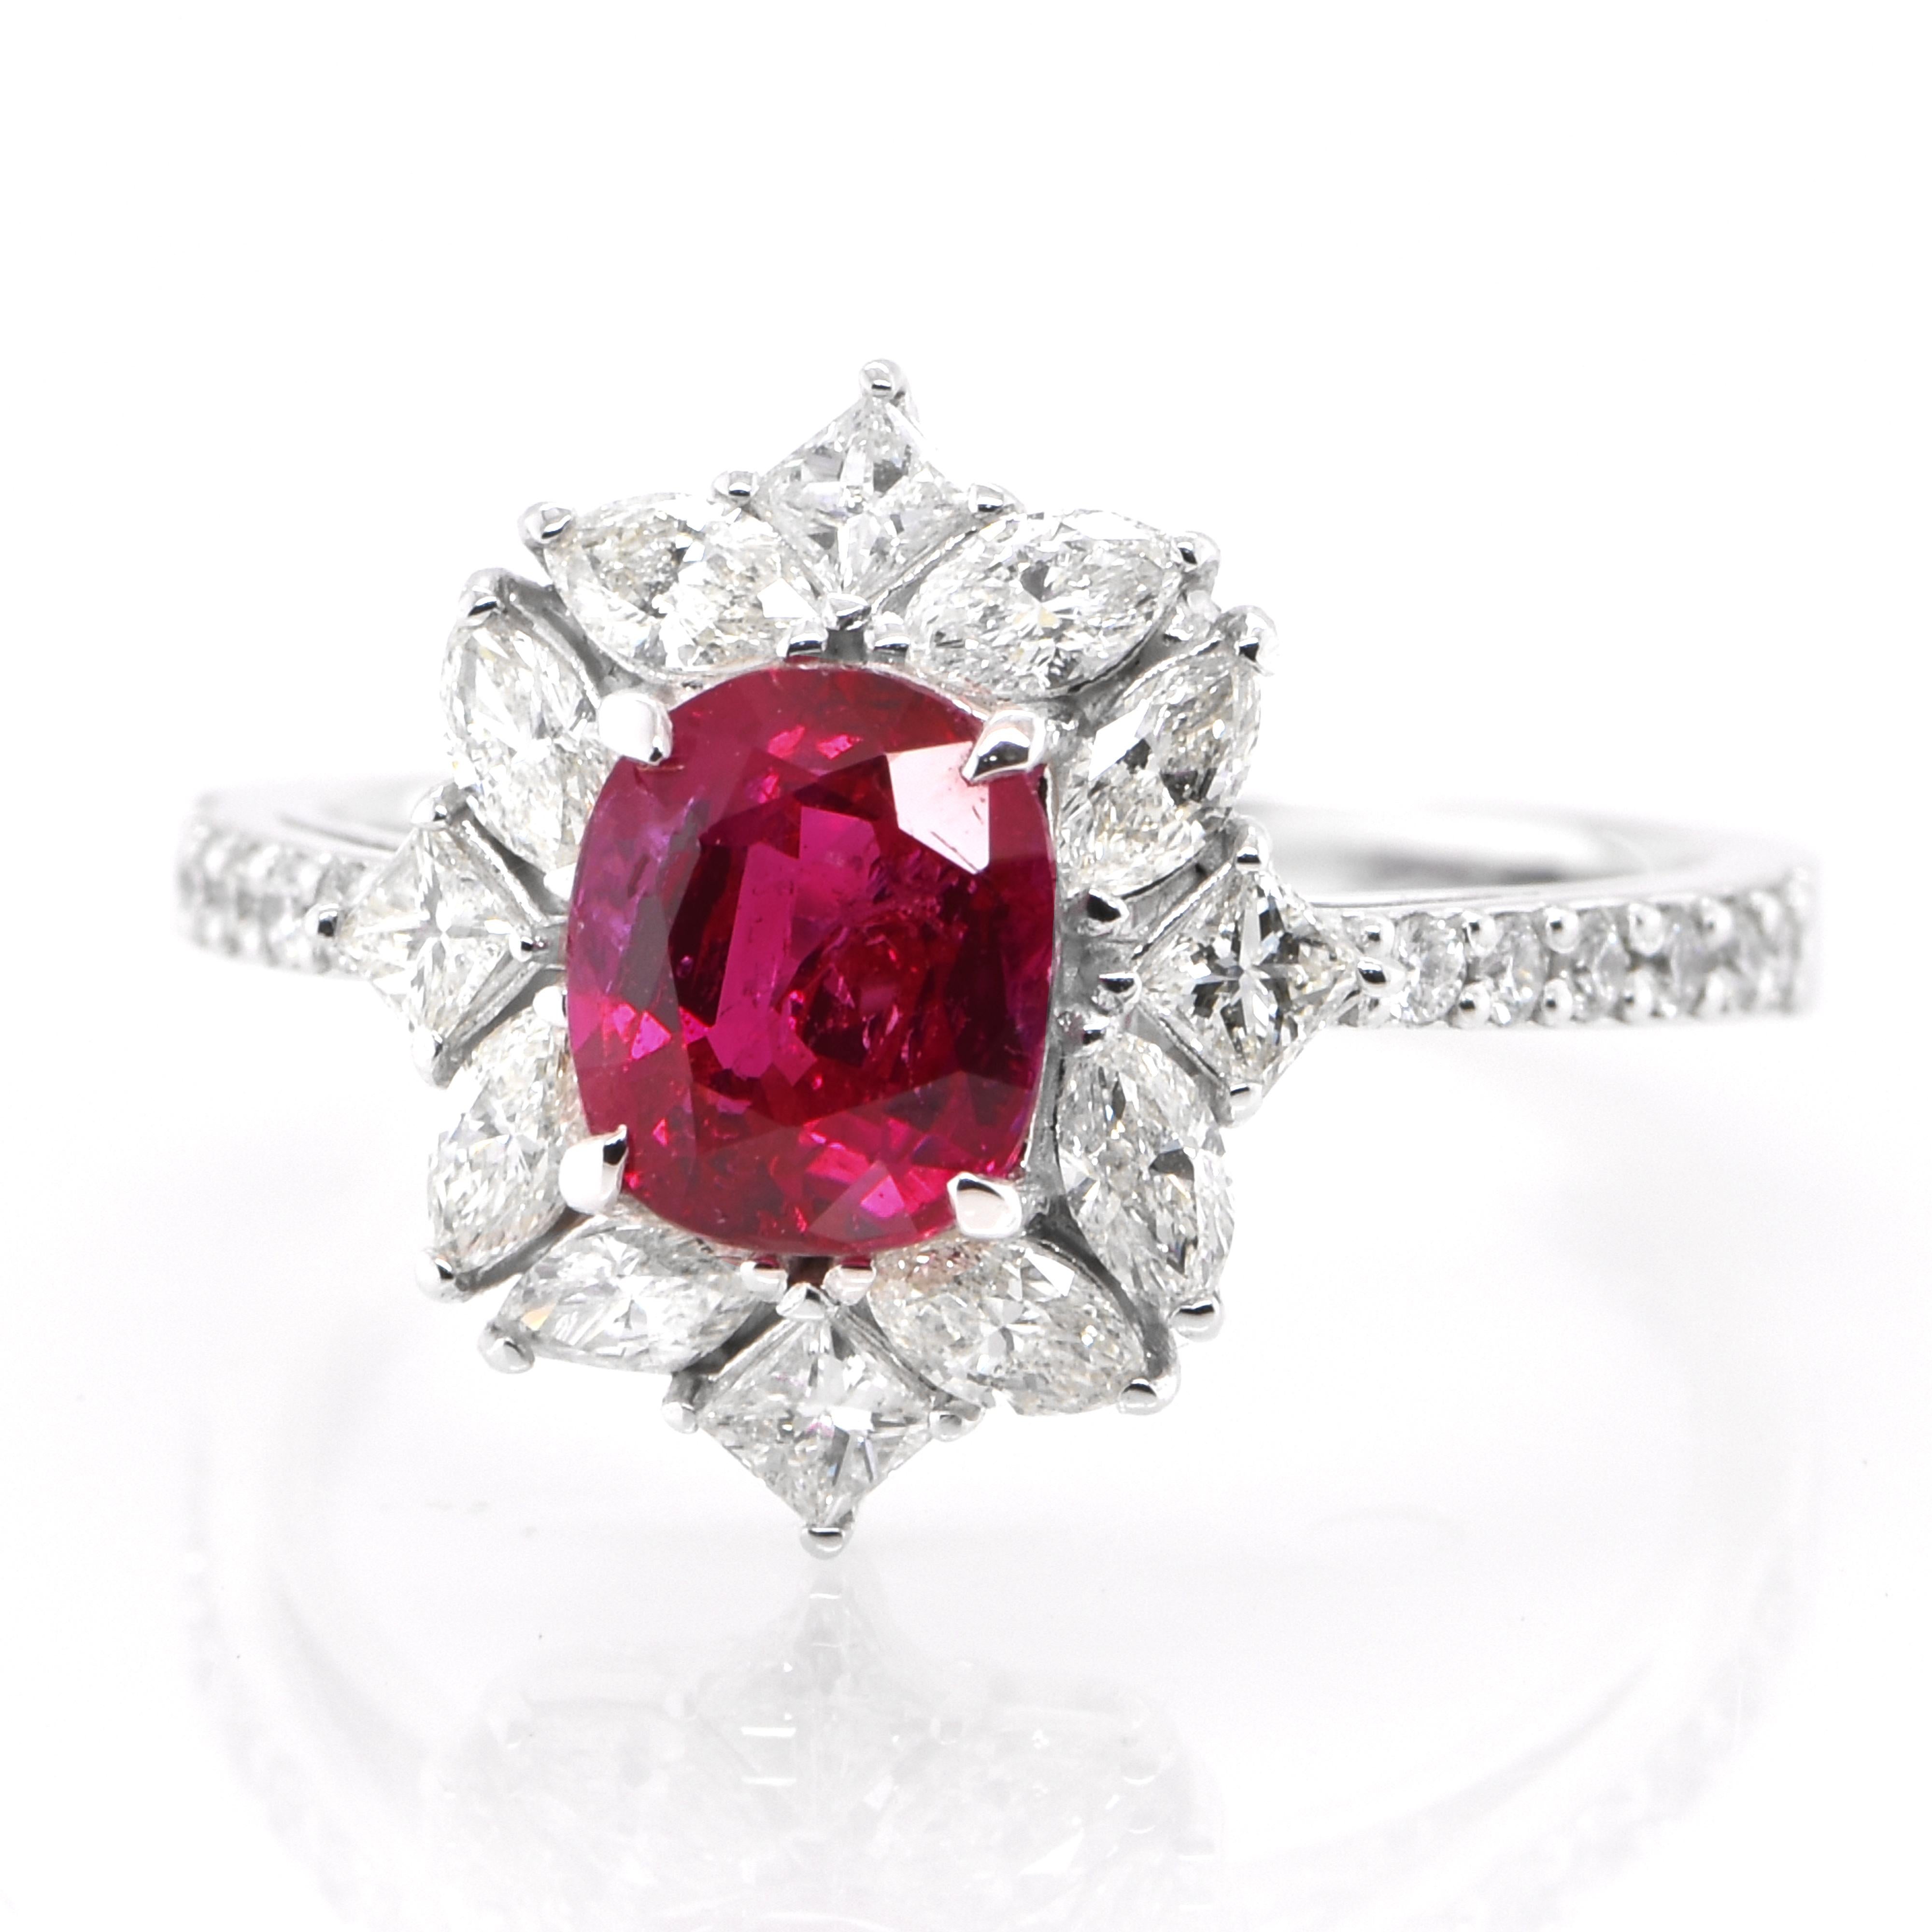 A beautiful Ring set in Platinum featuring a GIA Certified 1.73 Carat Natural Burmese, Untreated (Unheated) Ruby and 0.78 Carat Diamonds. Rubies are referred to as 